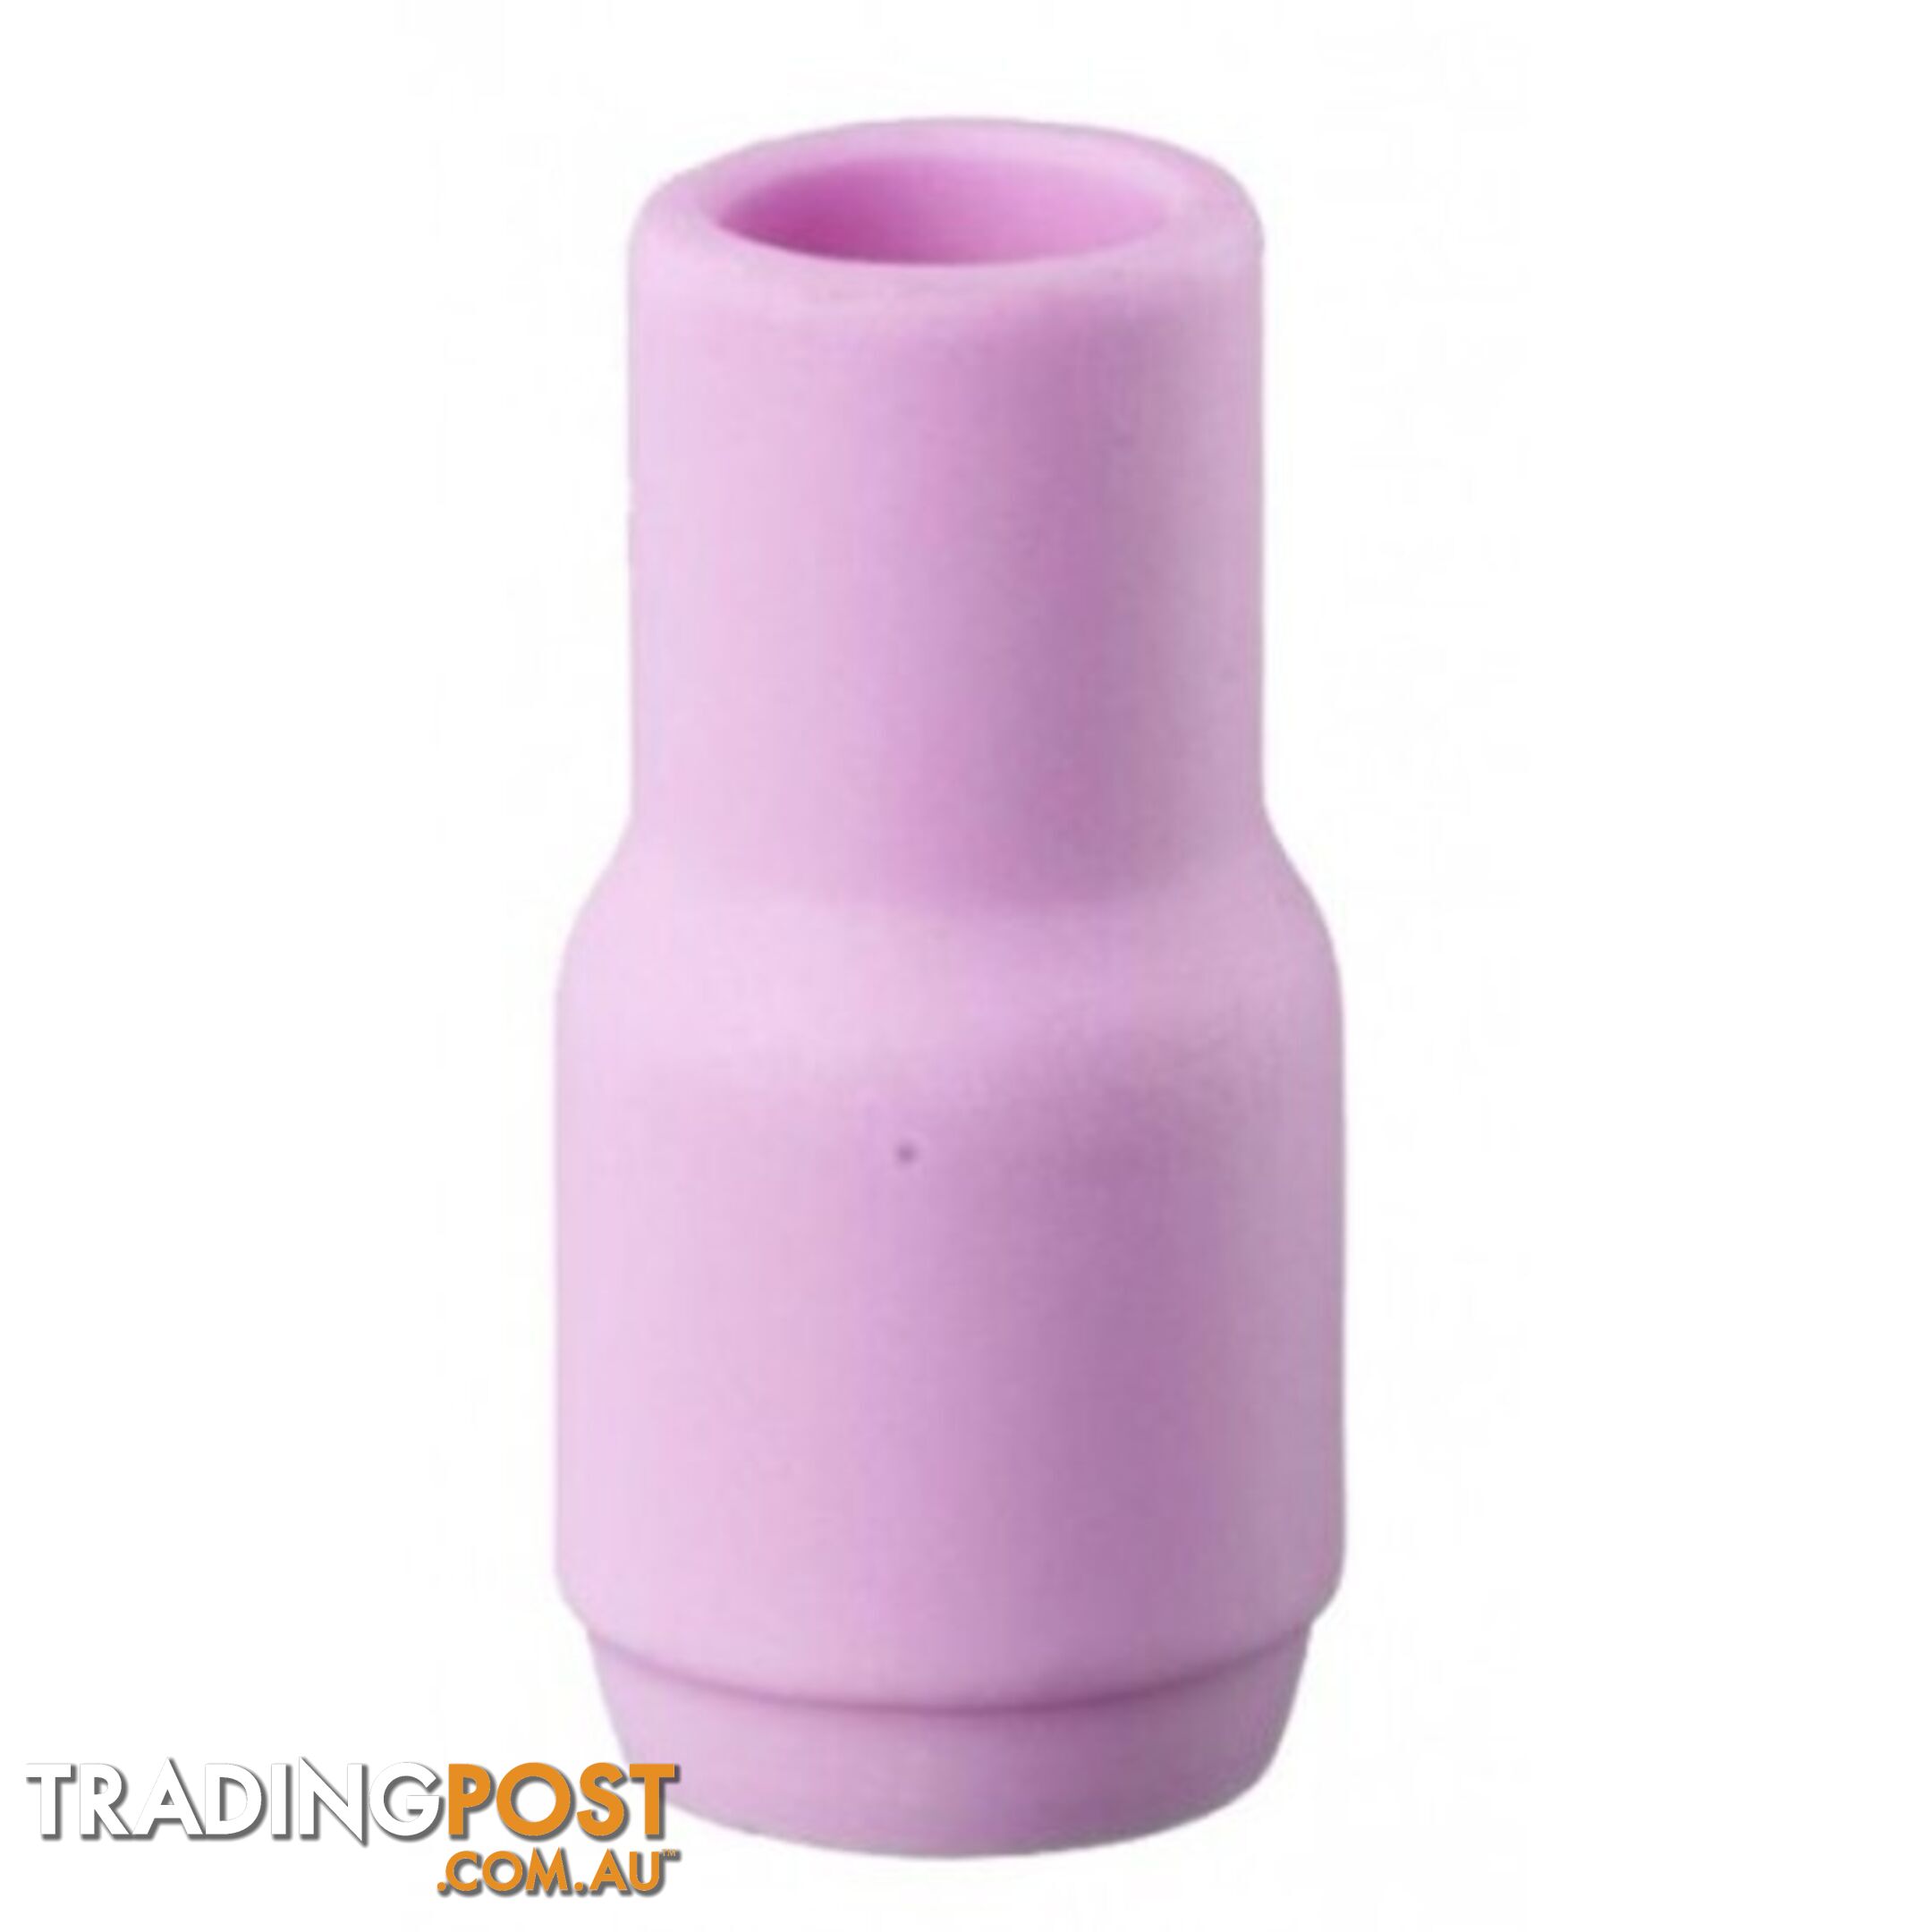 Ceramic Alumina Nozzle For Collet Body Size 8 Suits 9/20 Torch13N12 Binzel 701.0285 Pkt : 2